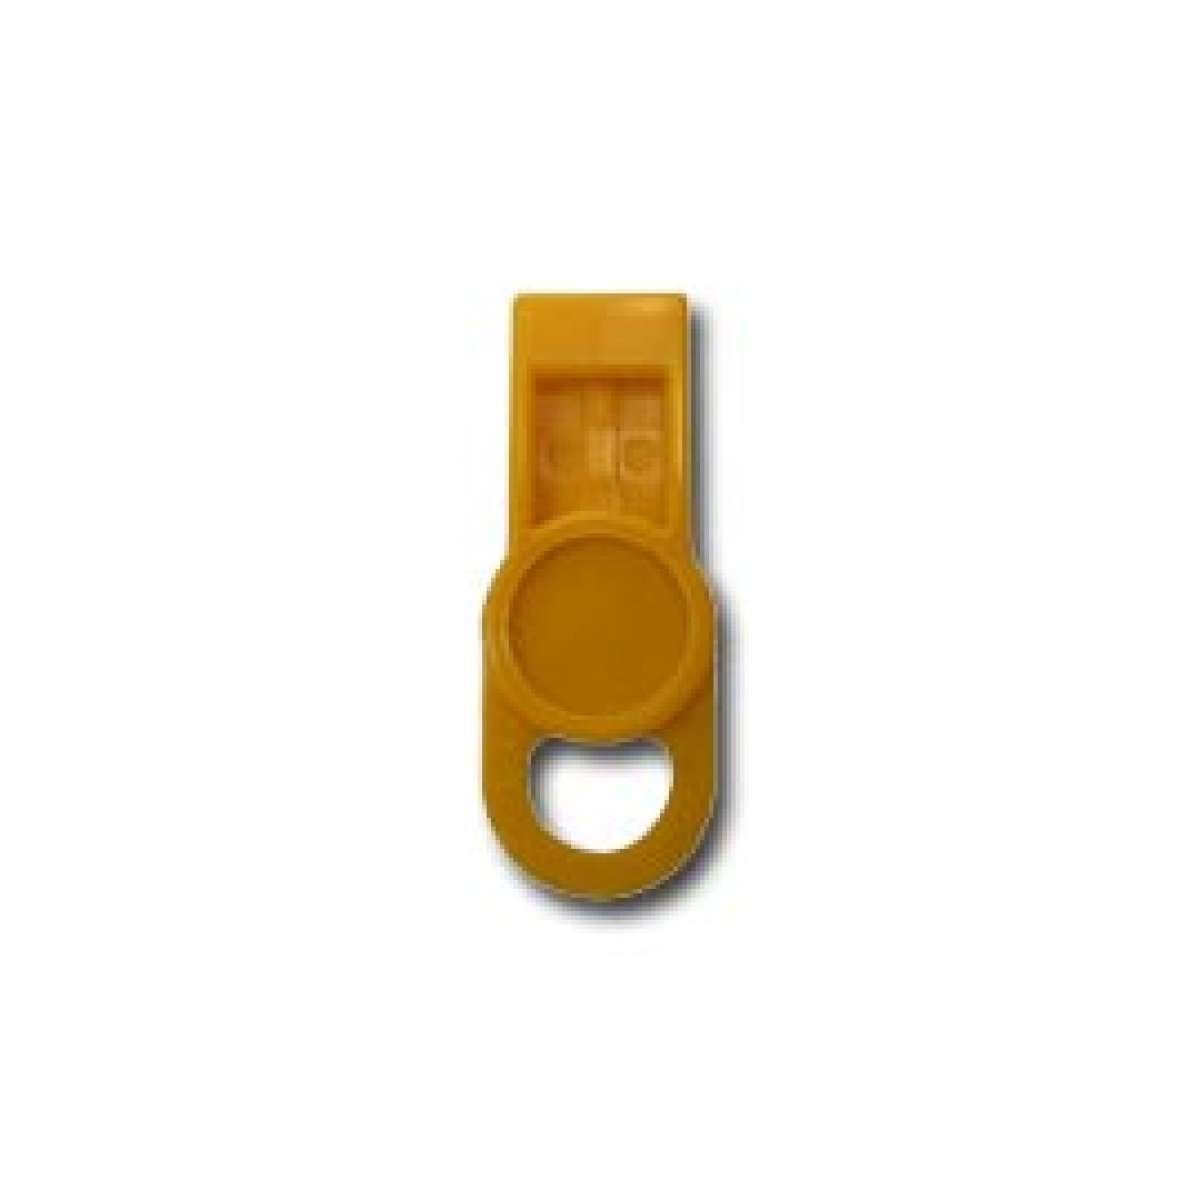 ID Washer Tab - LABEL SAFE - Yellow - Pack of 6